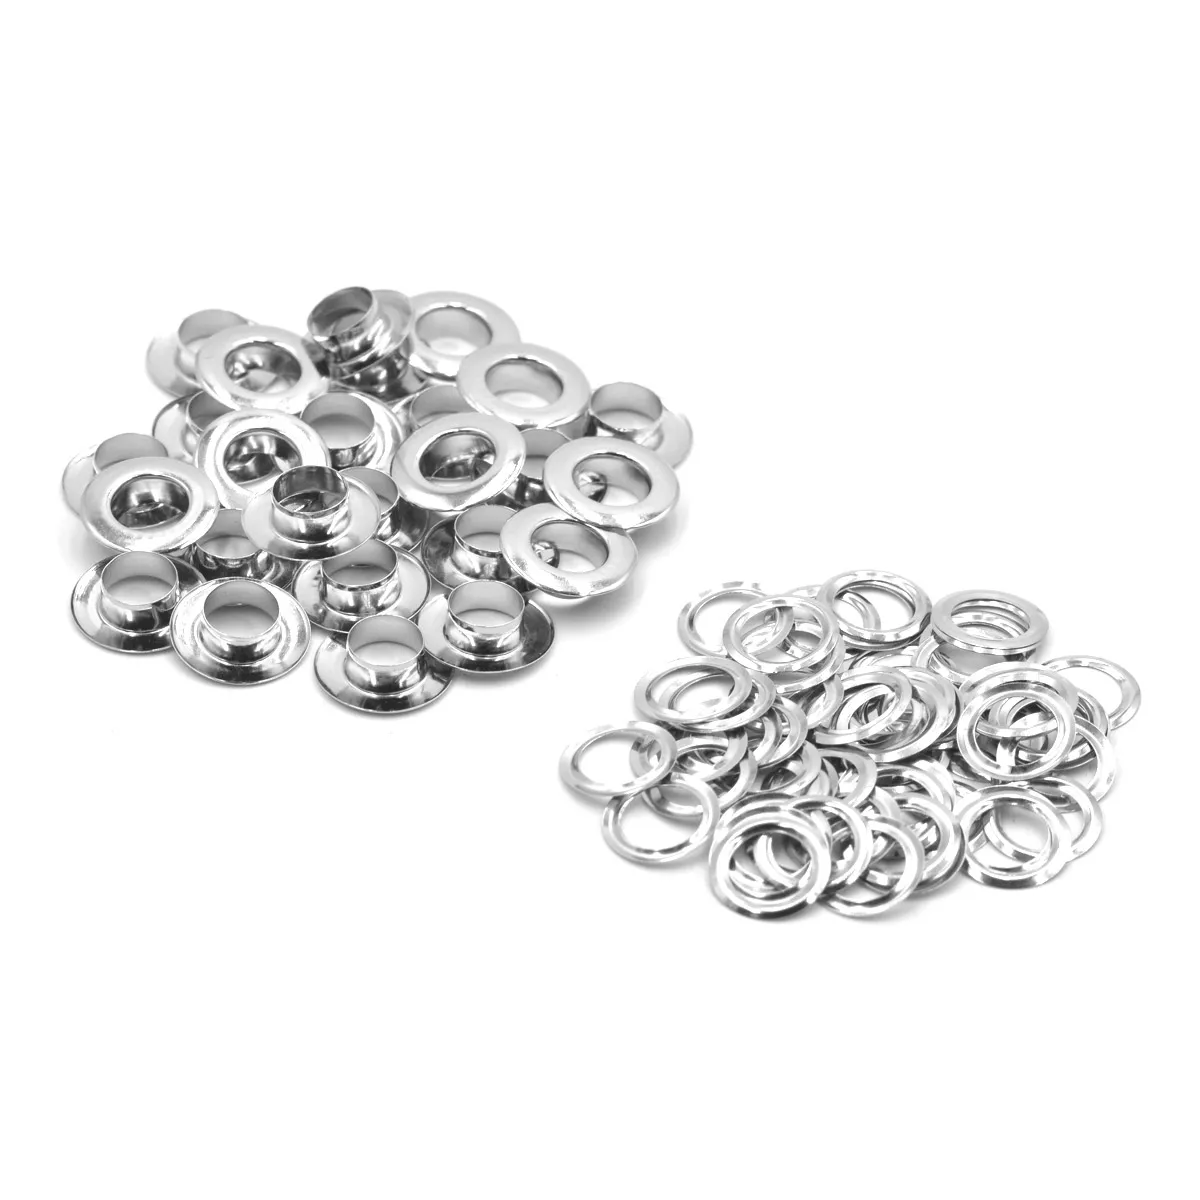 Brass Material Silver Color 4mm 5mm 6mm 8mm 10mm 12mm Flat Face Grommet Eyelet With Washer Leather Craft Bags Shoes Belt Cap